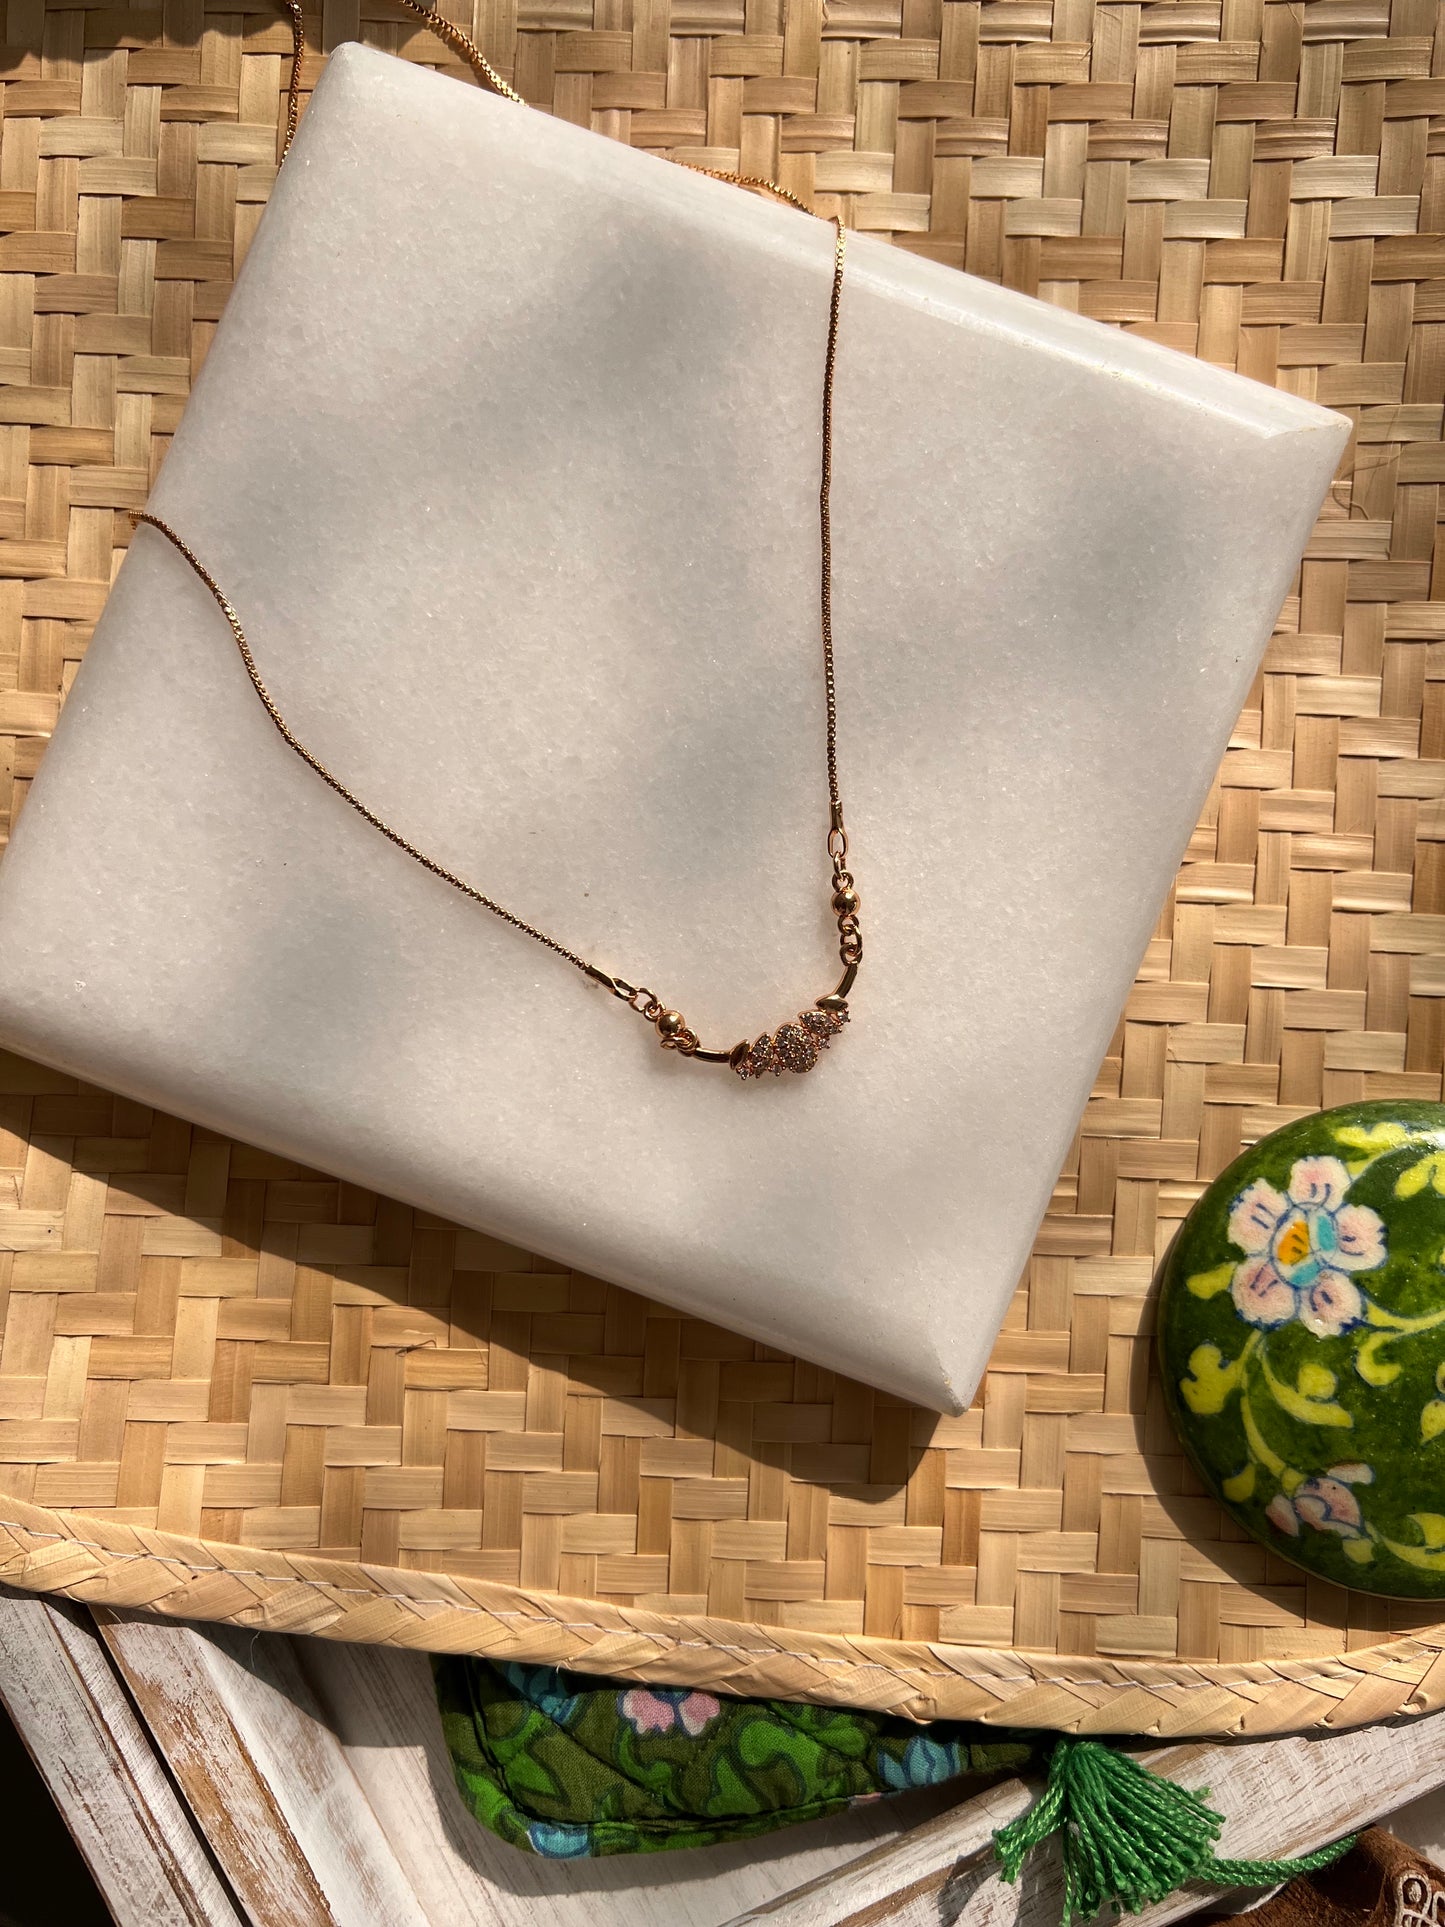 Minimal Chain Necklace